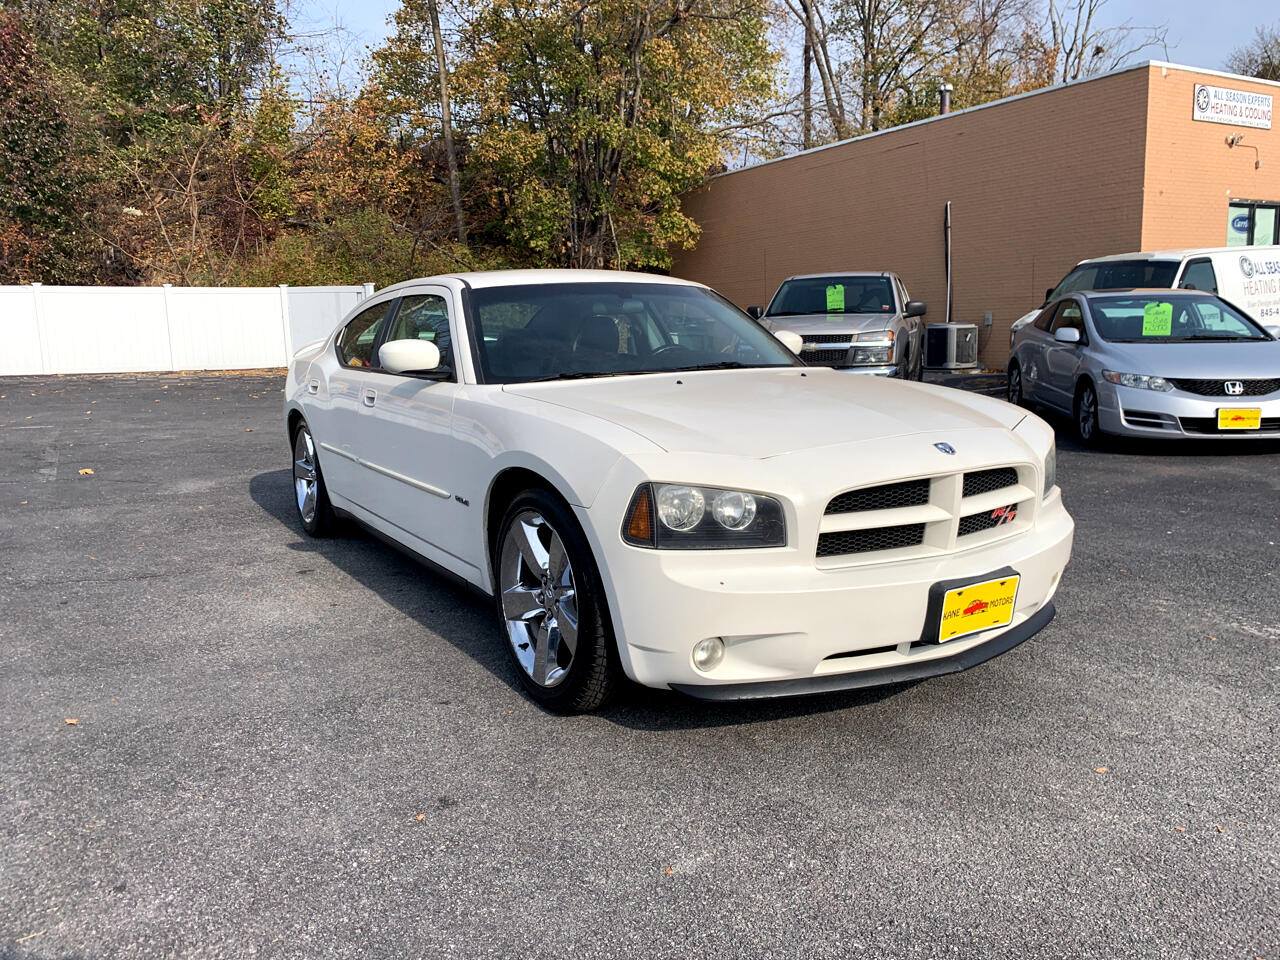 Used 2007 Dodge Charger R T For Sale In Poughkeepsie Ny